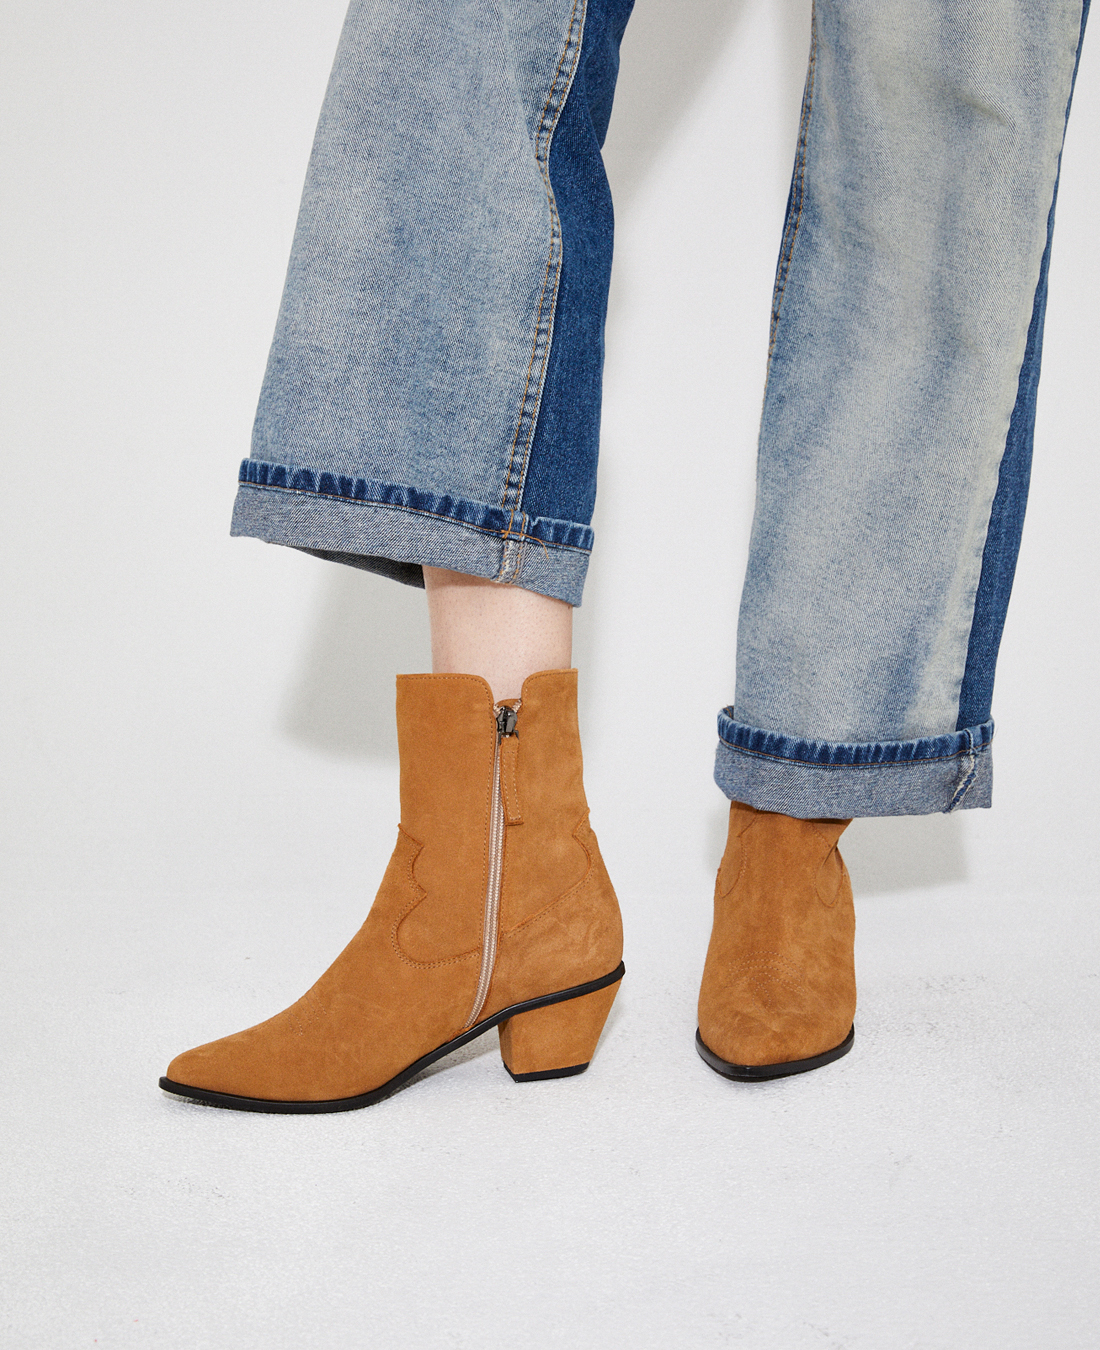 Ankle Western Boots (Camel Suede)